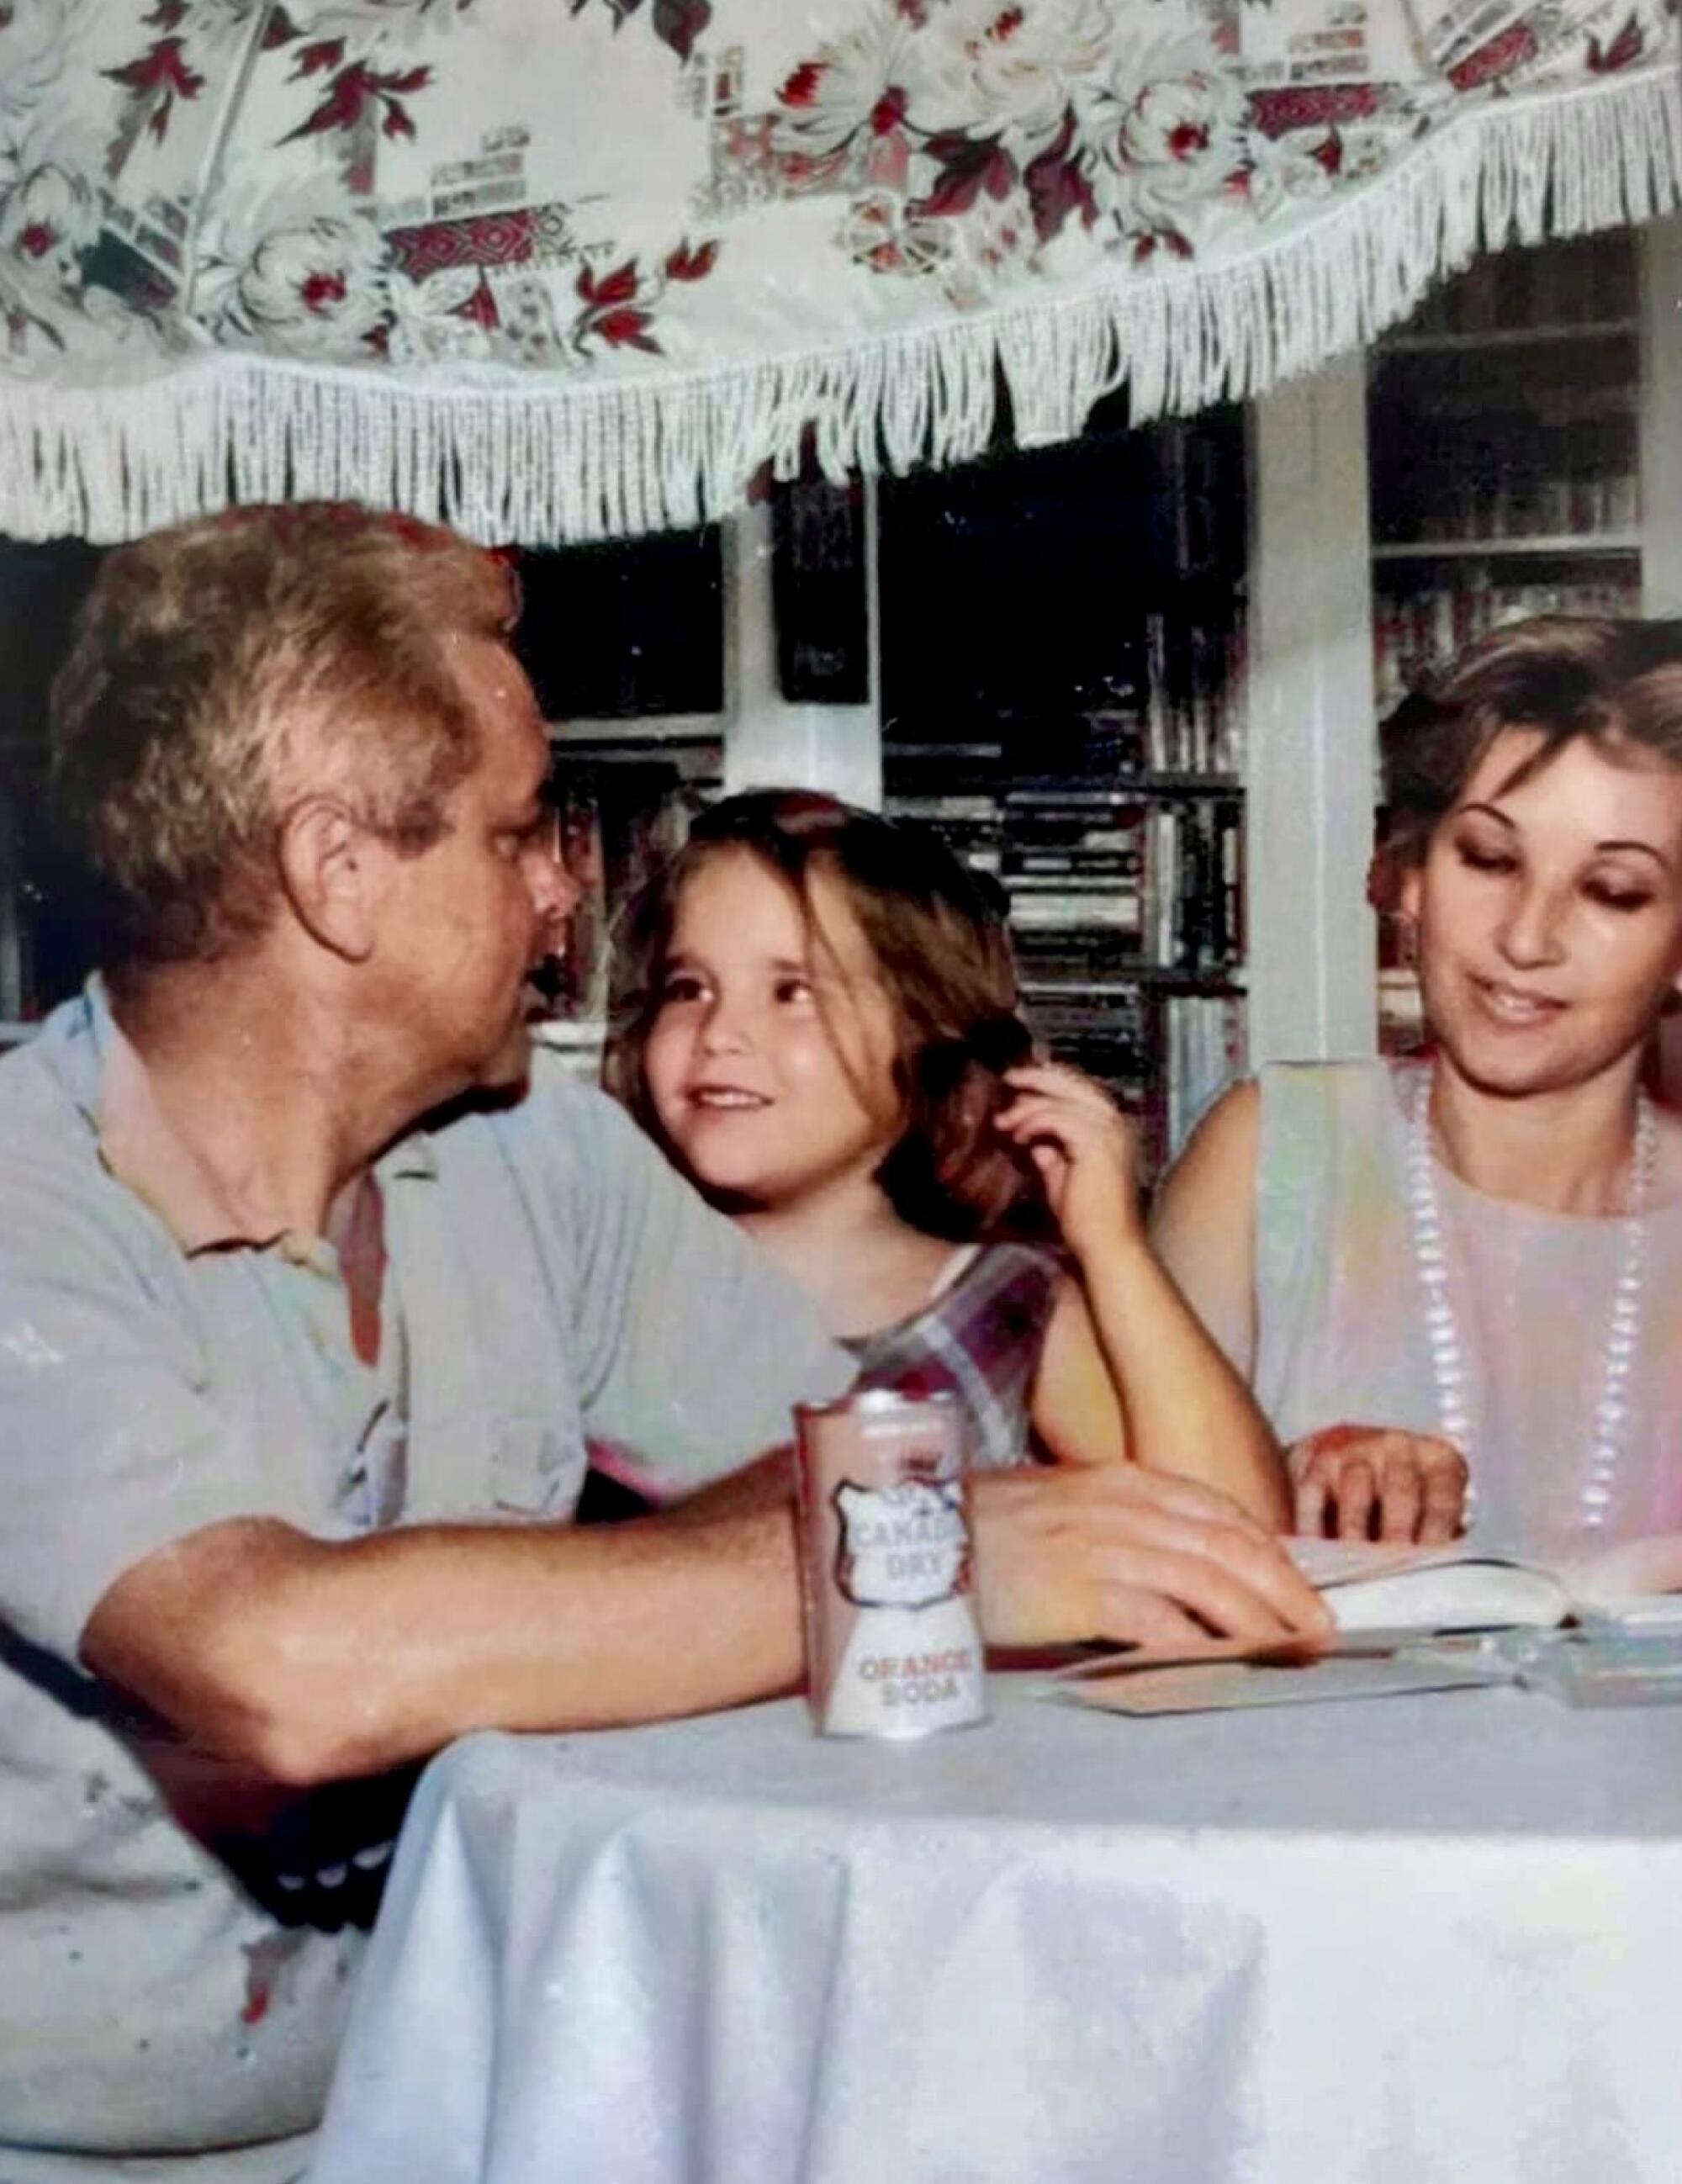 A young girl sitting at a table between her parents.